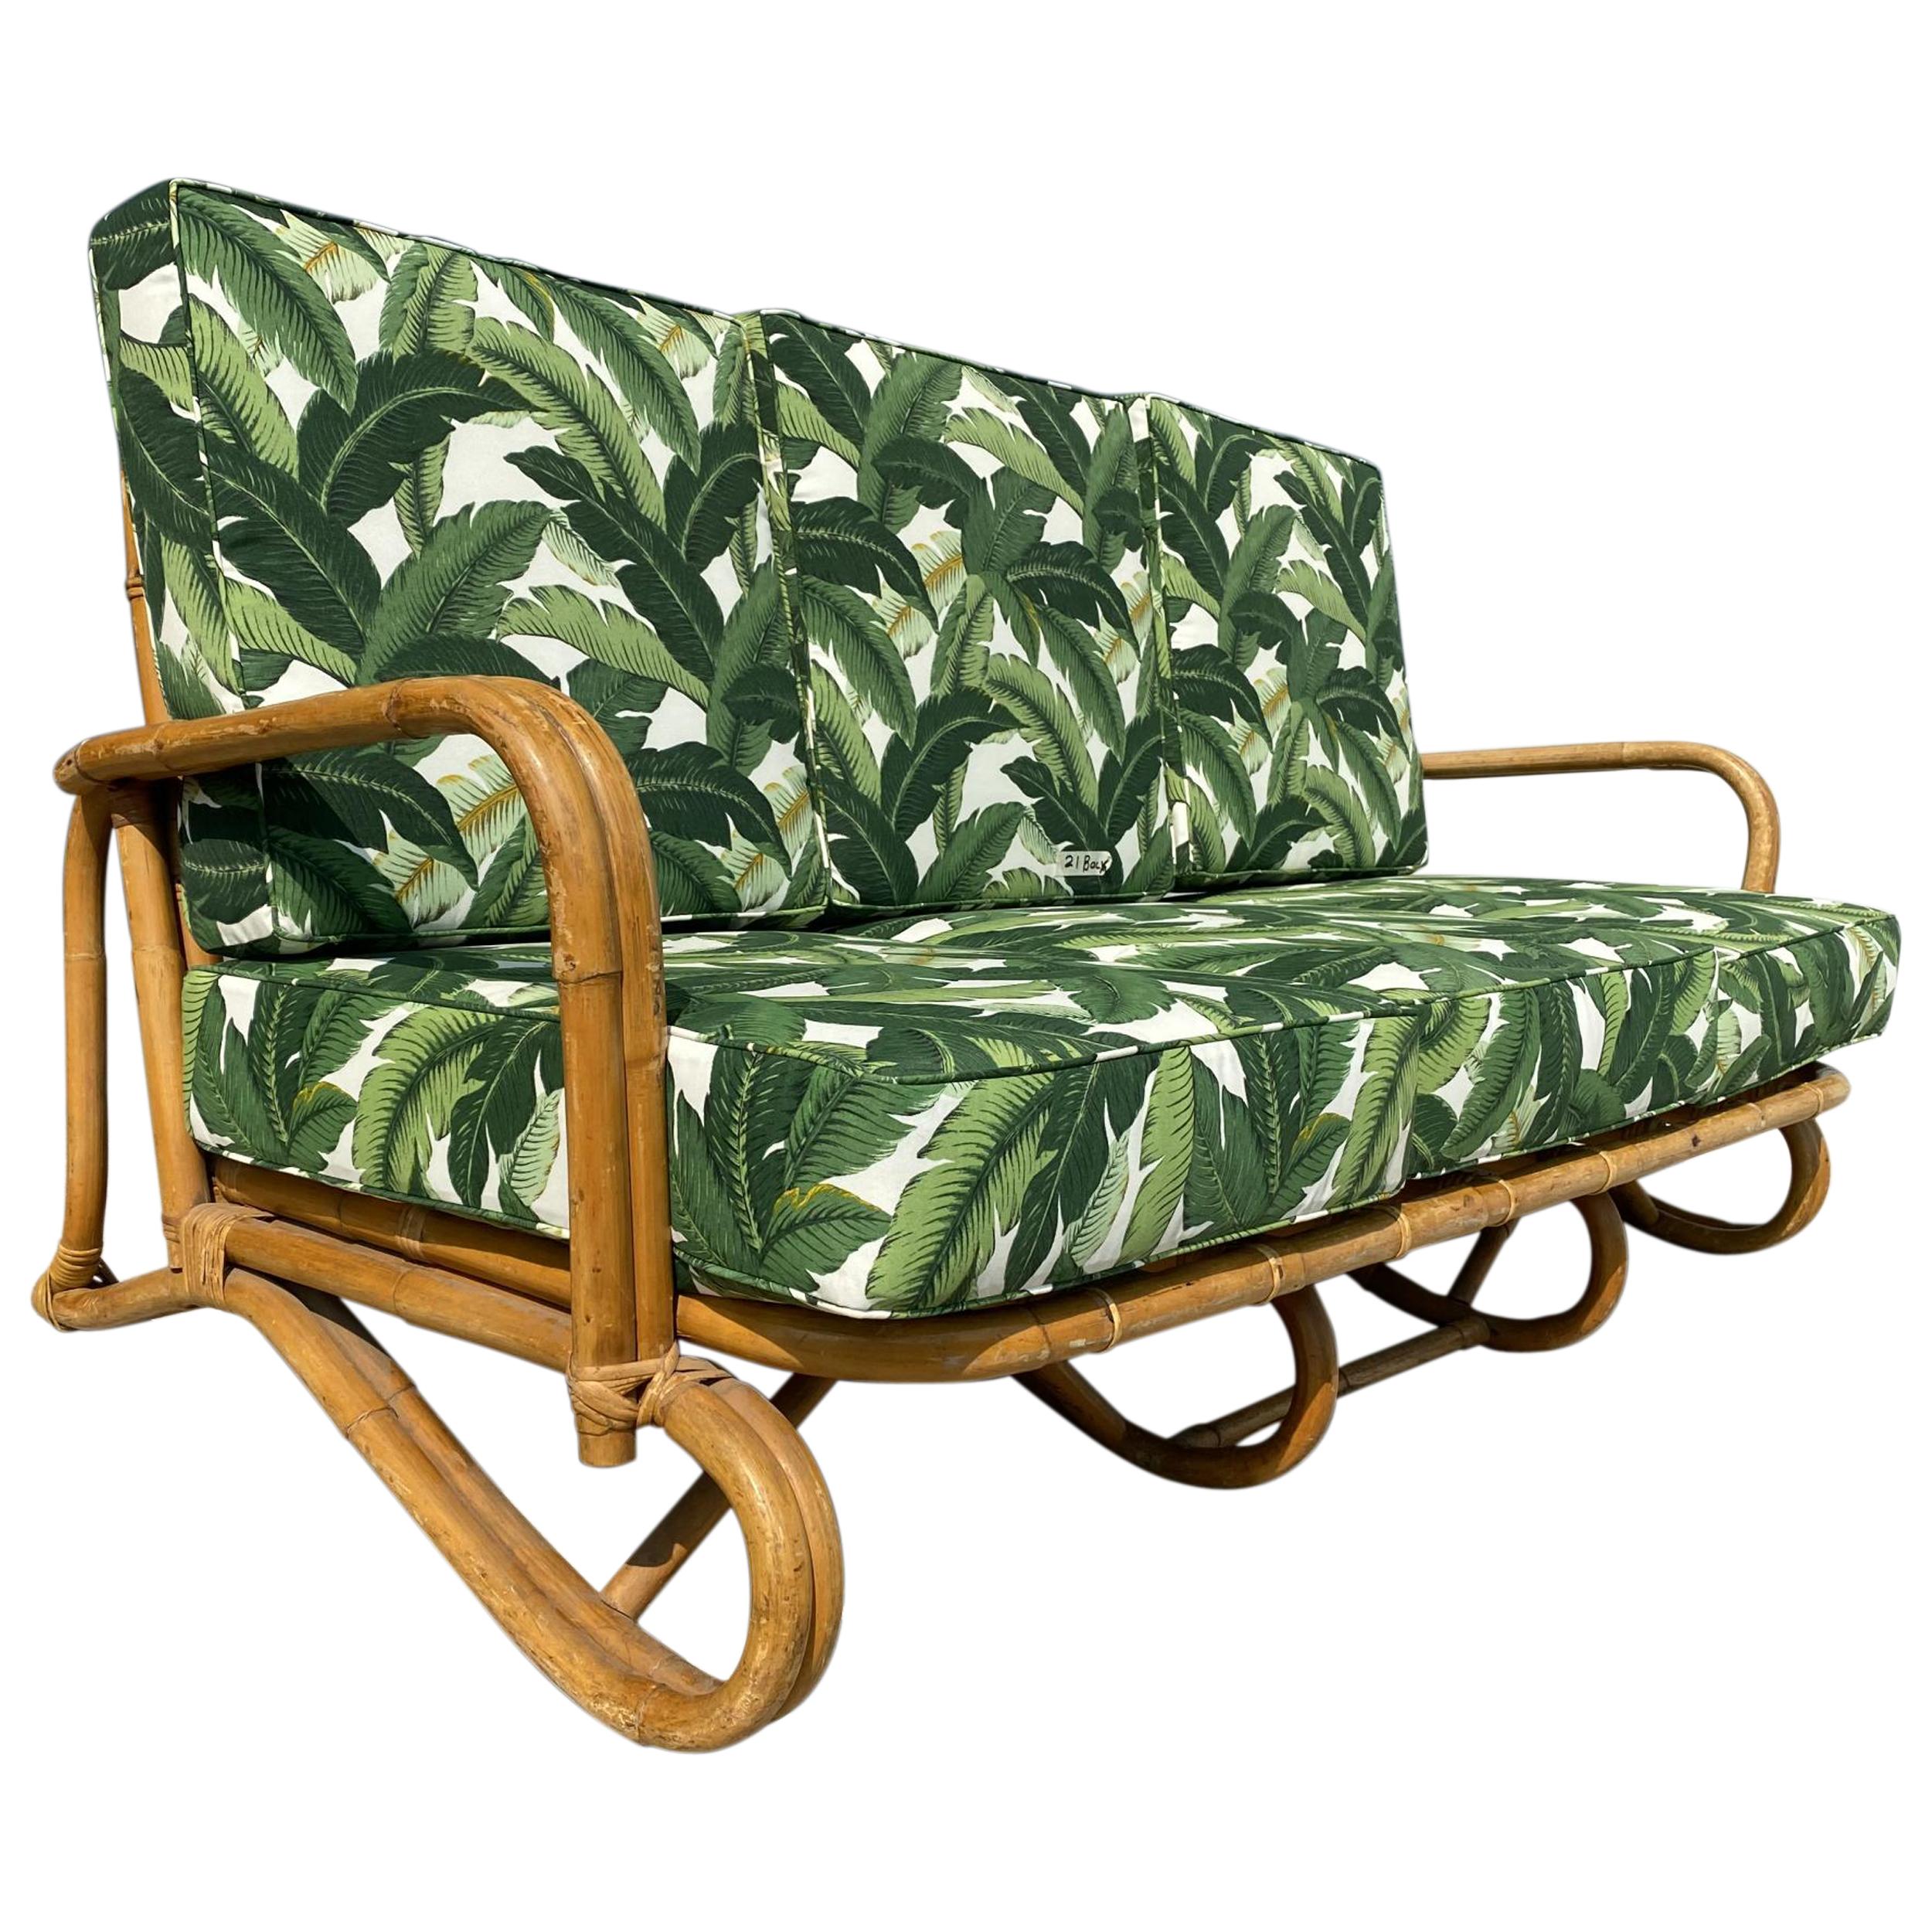 Restored "Hairpin" Leg Rattan 2-Strand 3-Seat Sofa with Bent Pole Arms